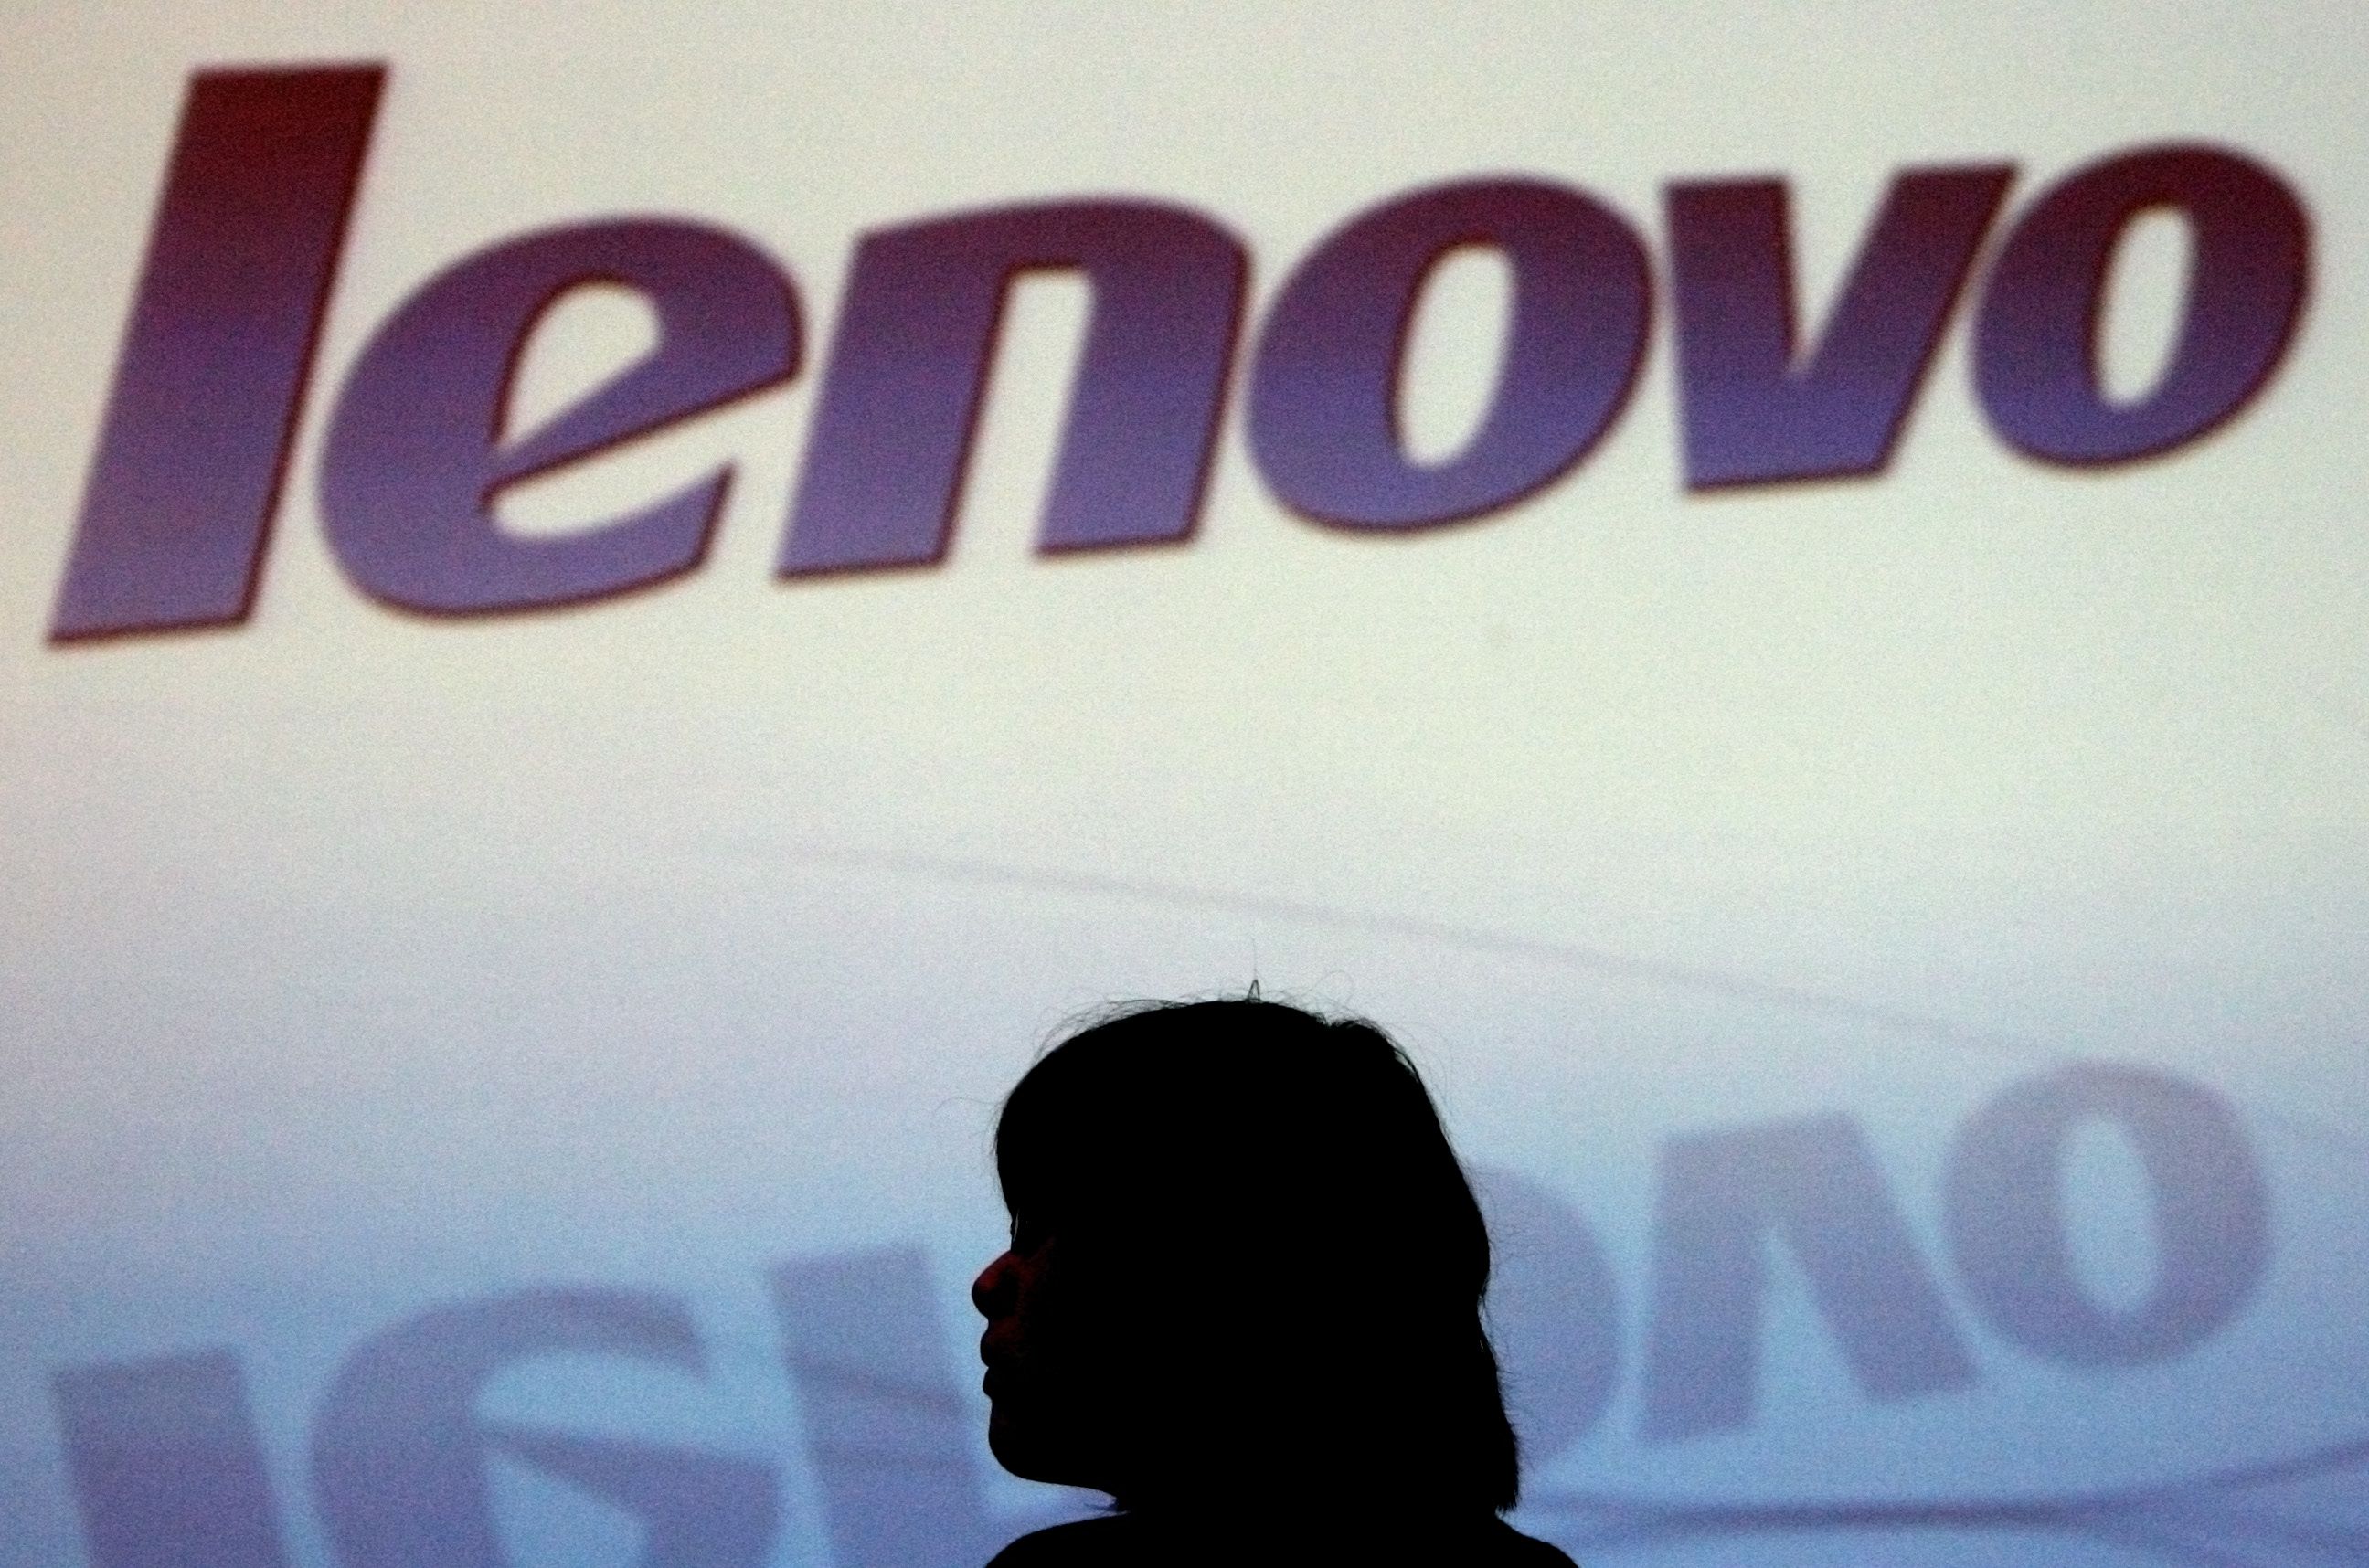 Chinese workers who quit their jobs at IBM rather than take new positions at Lenovo under an M&A deal may be regretting their decision. Photo: Reuters